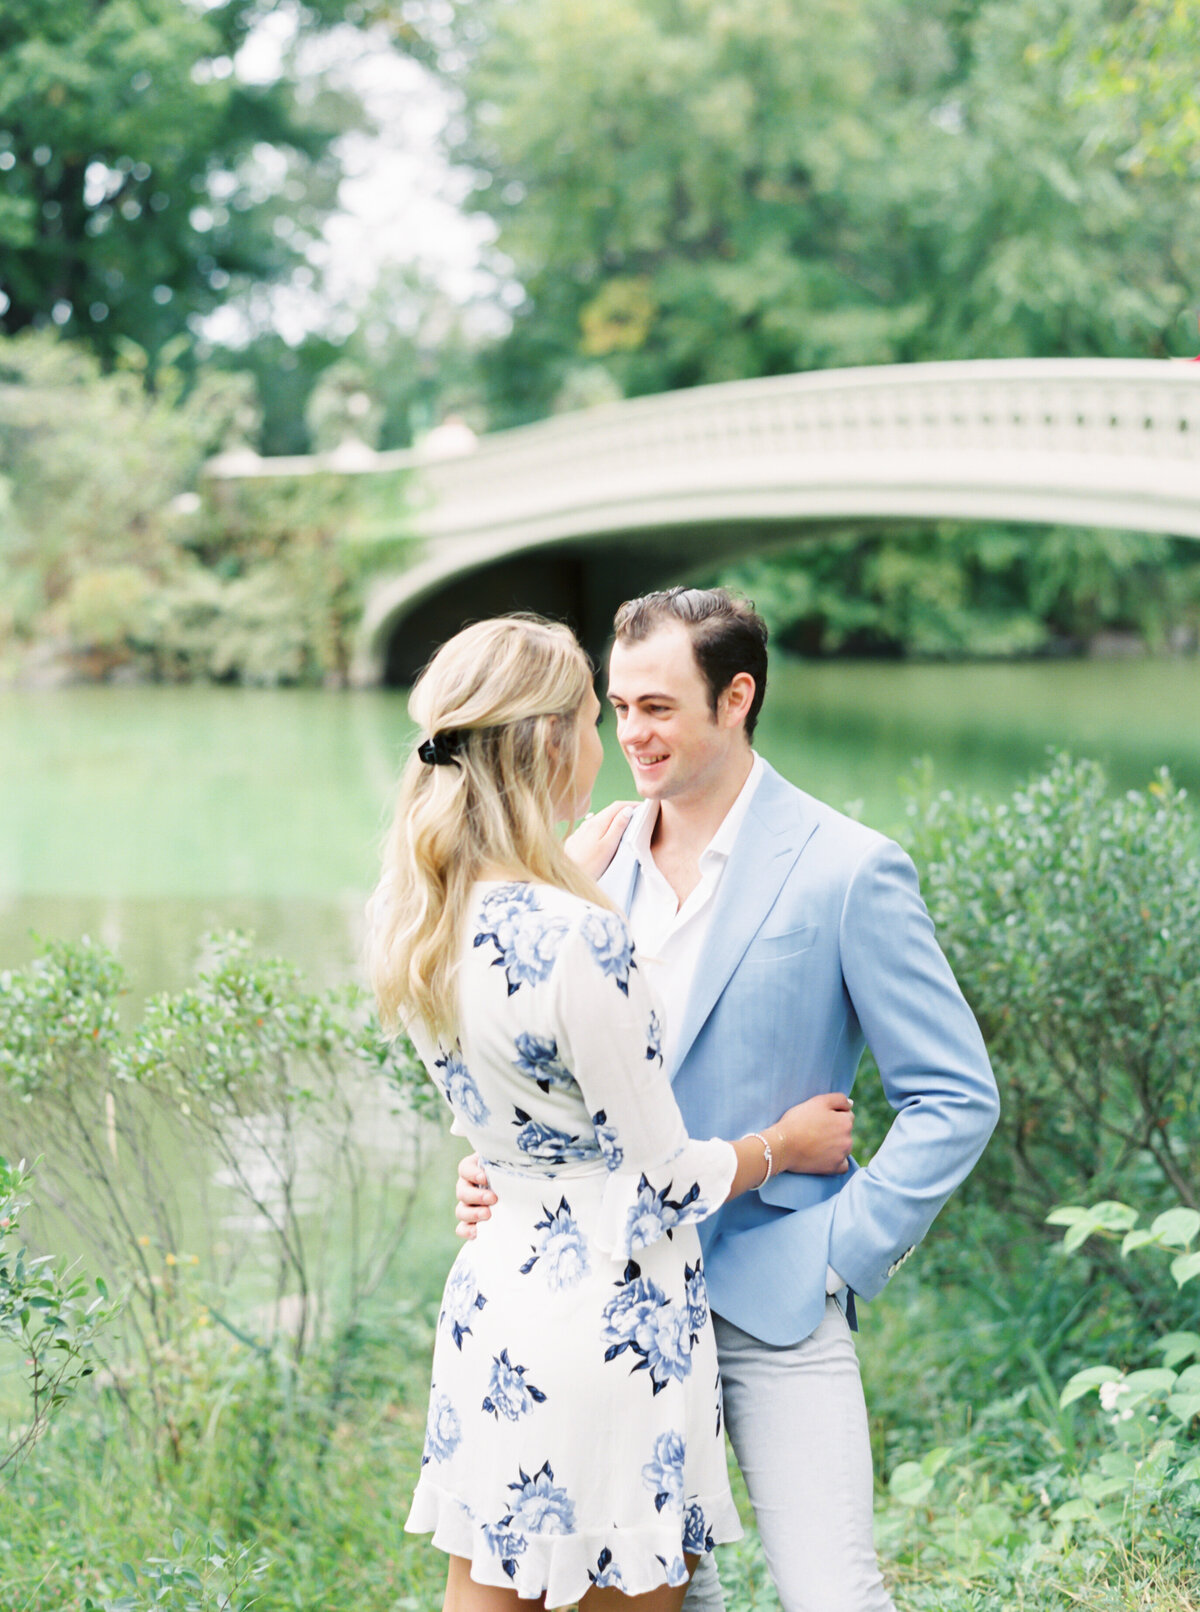 Tiffaney Childs Photography-NYC Wedding Photographer-Andrea + John-Central Park Engagement -110